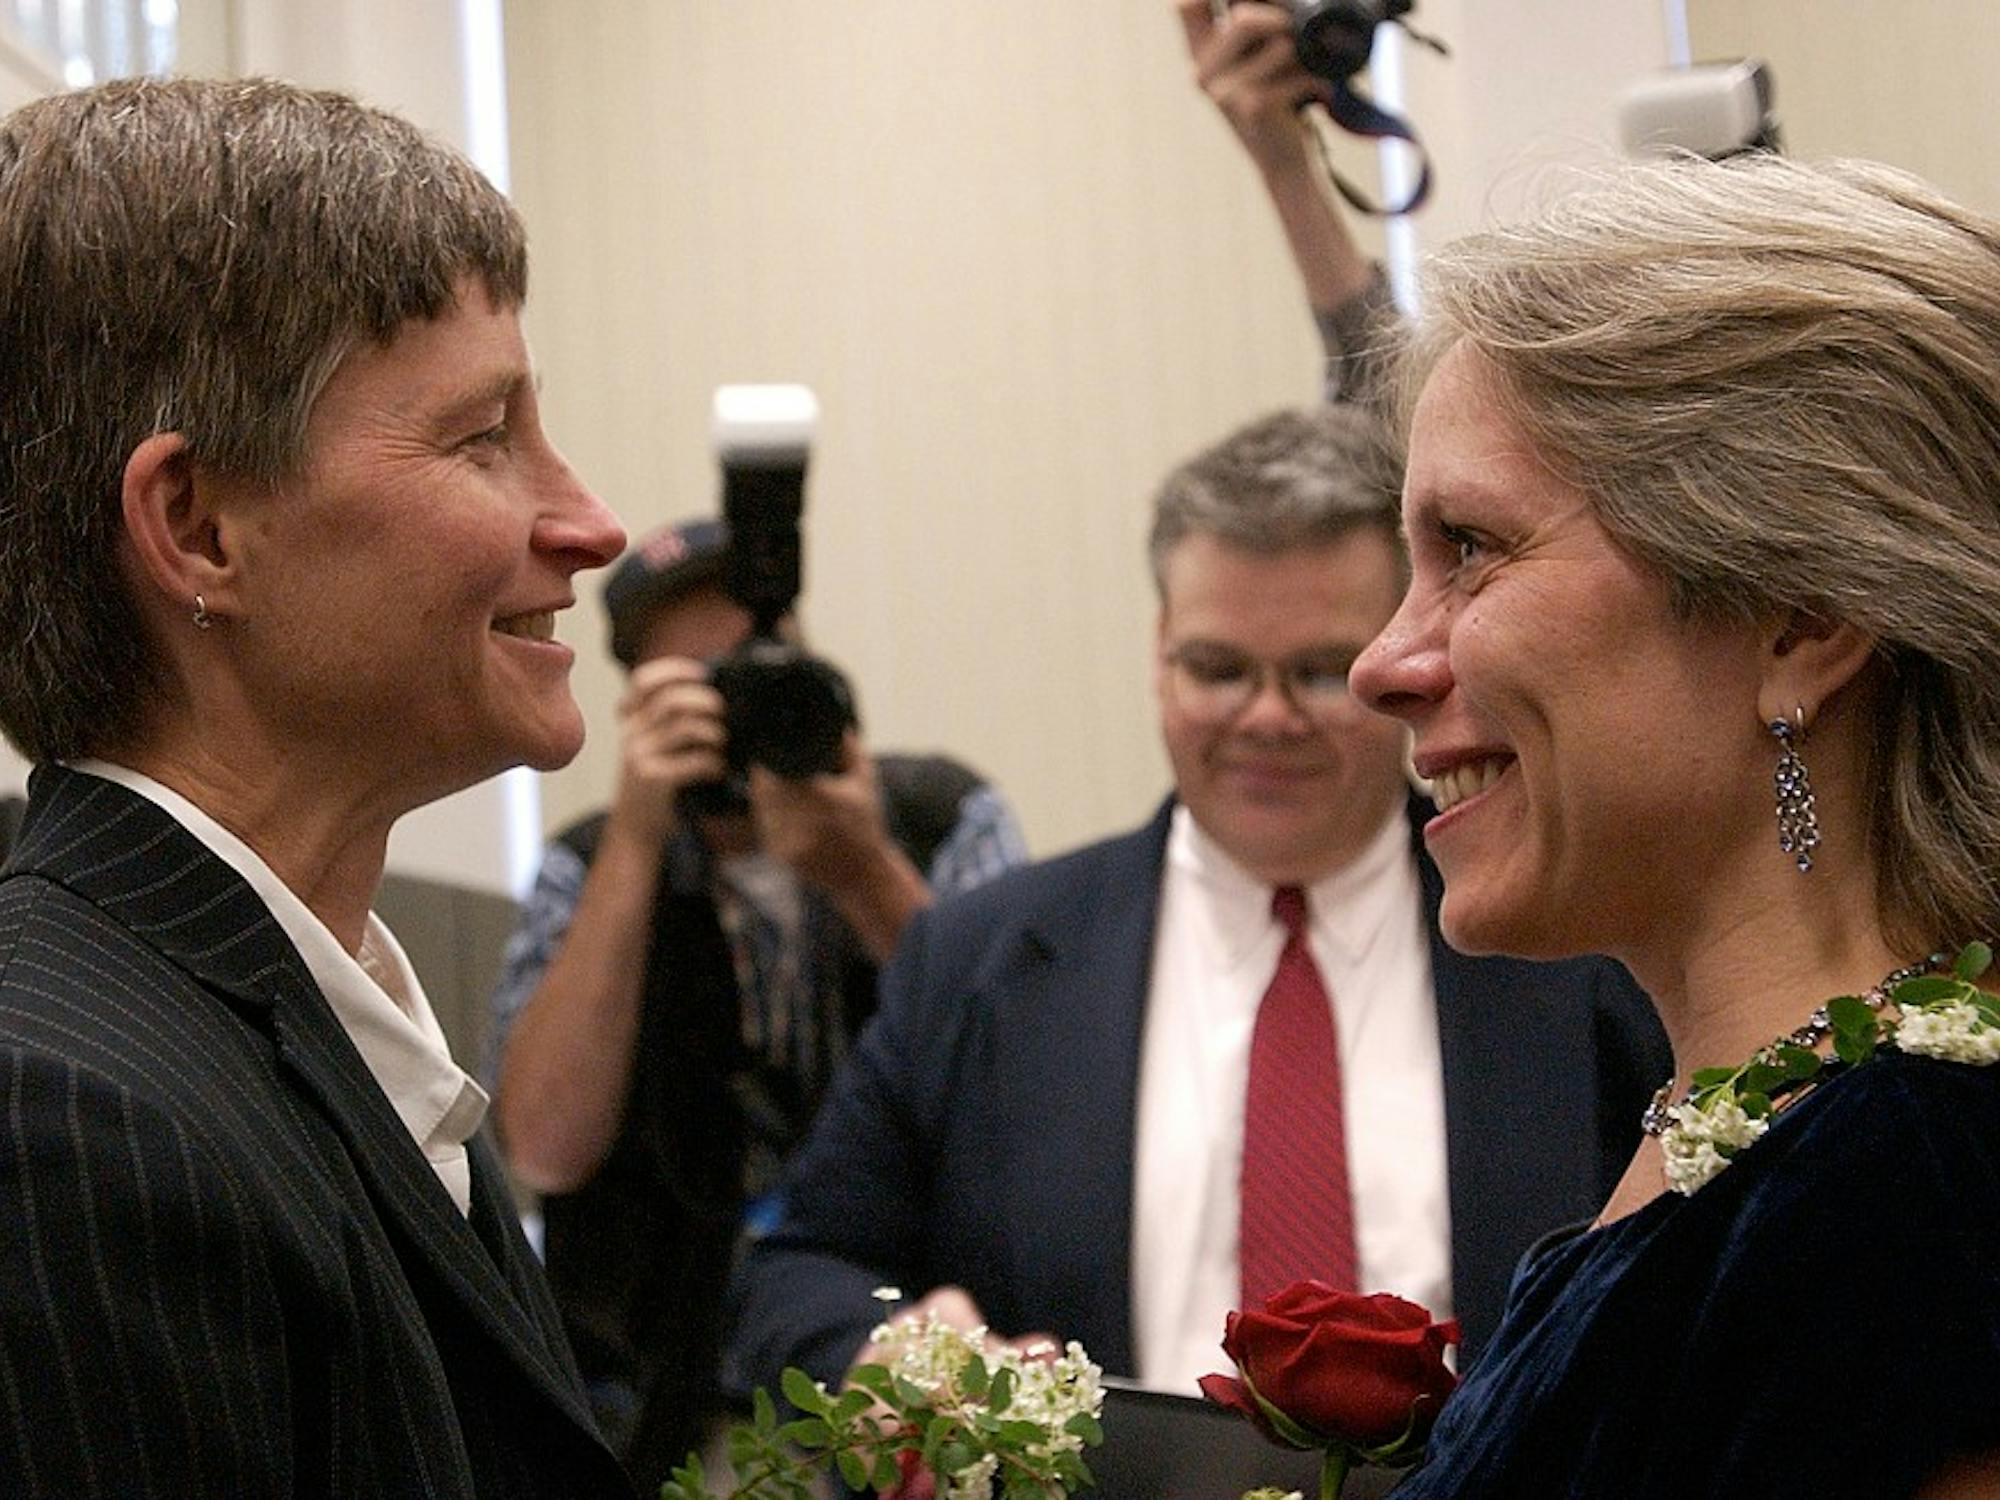 	Robyn Ochs (right) and her partner Peg proudly became one of the first homosexual couples to get married when Massachusetts legalized gay marriage in 2004.